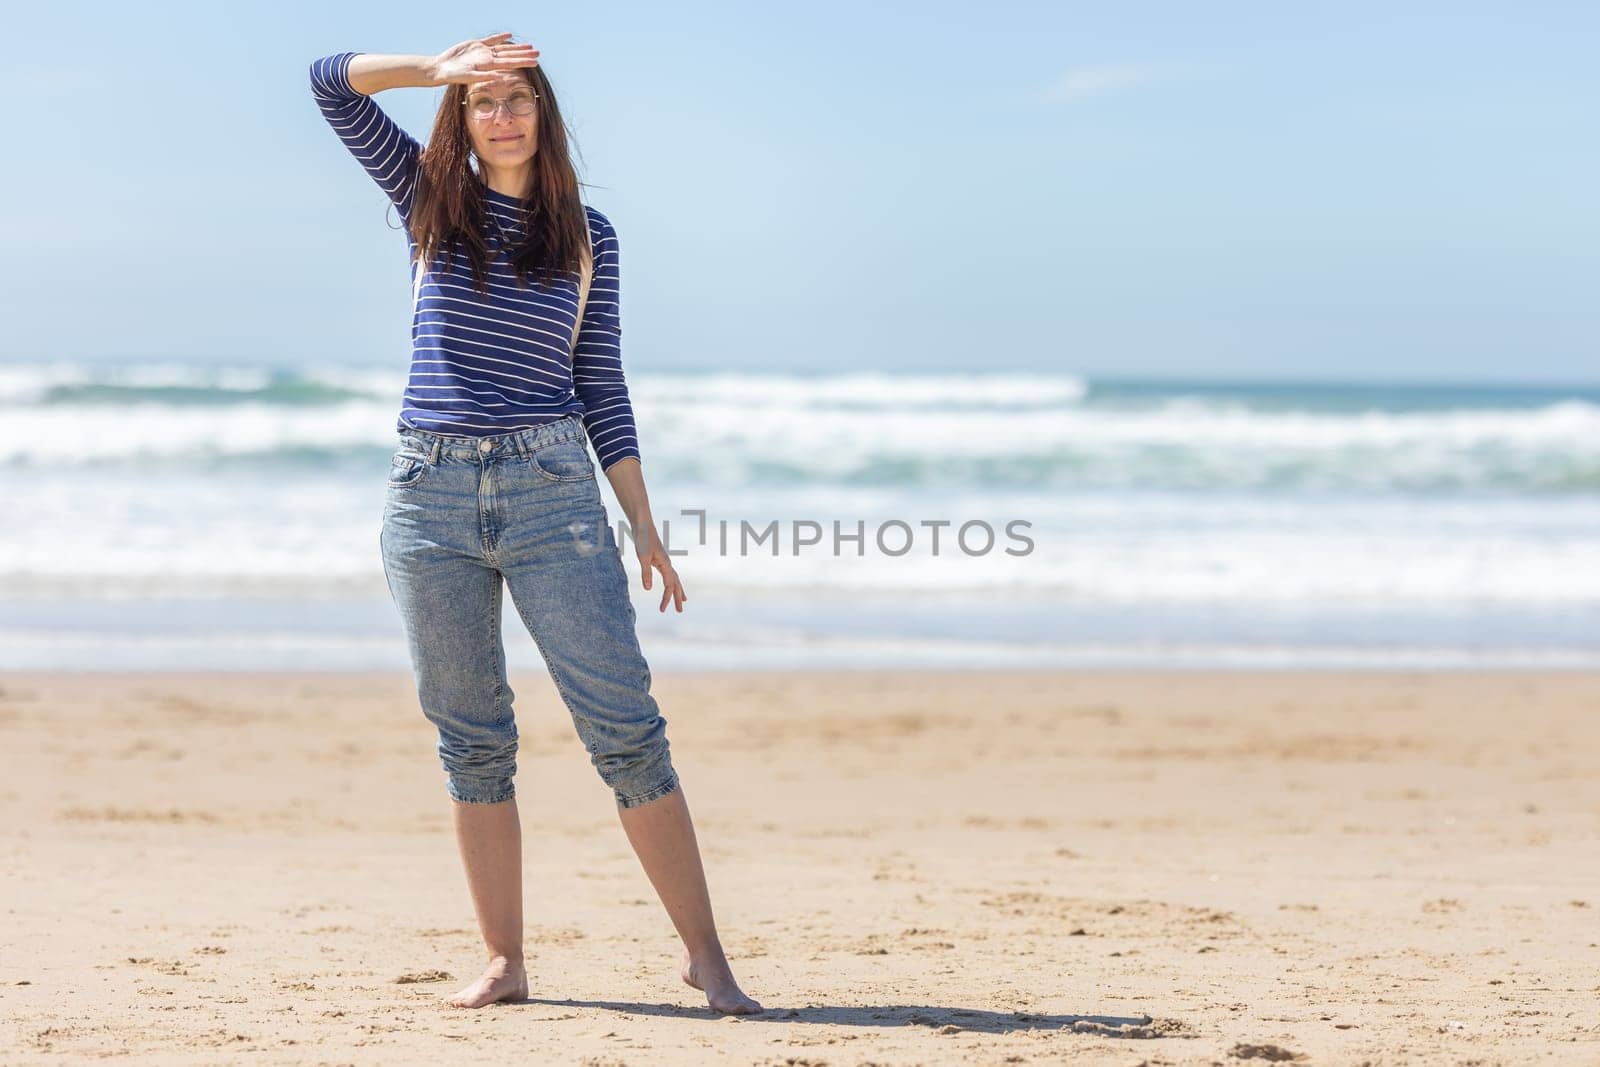 An adult smiling woman stand on sea beach and covering her face from the sunlight. Mid shot